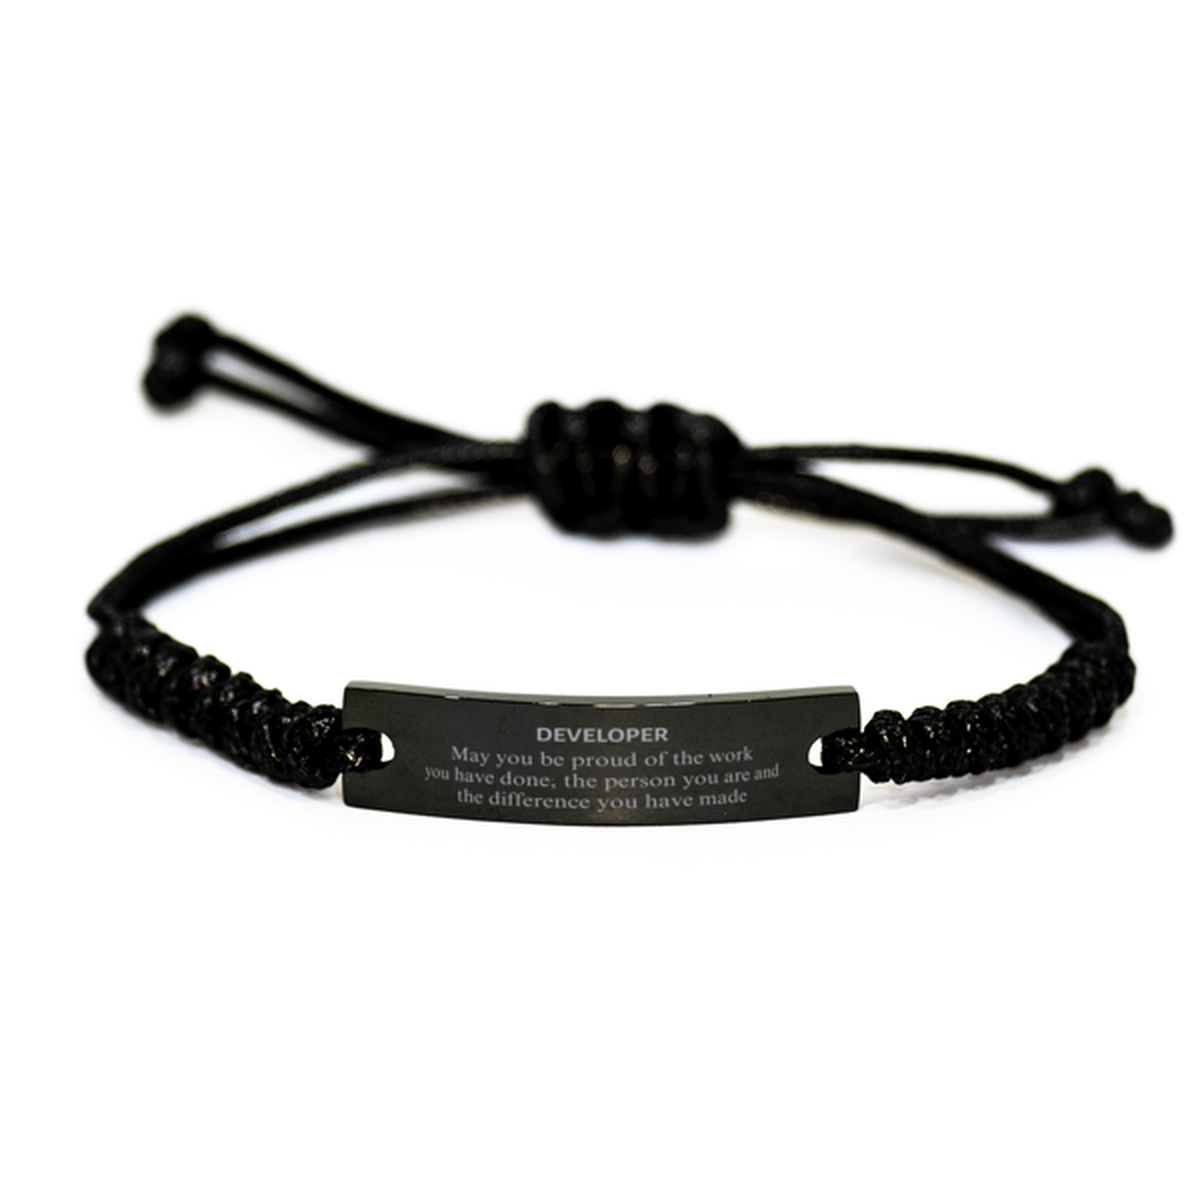 Developer May you be proud of the work you have done, Retirement Developer Black Rope Bracelet for Colleague Appreciation Gifts Amazing for Developer